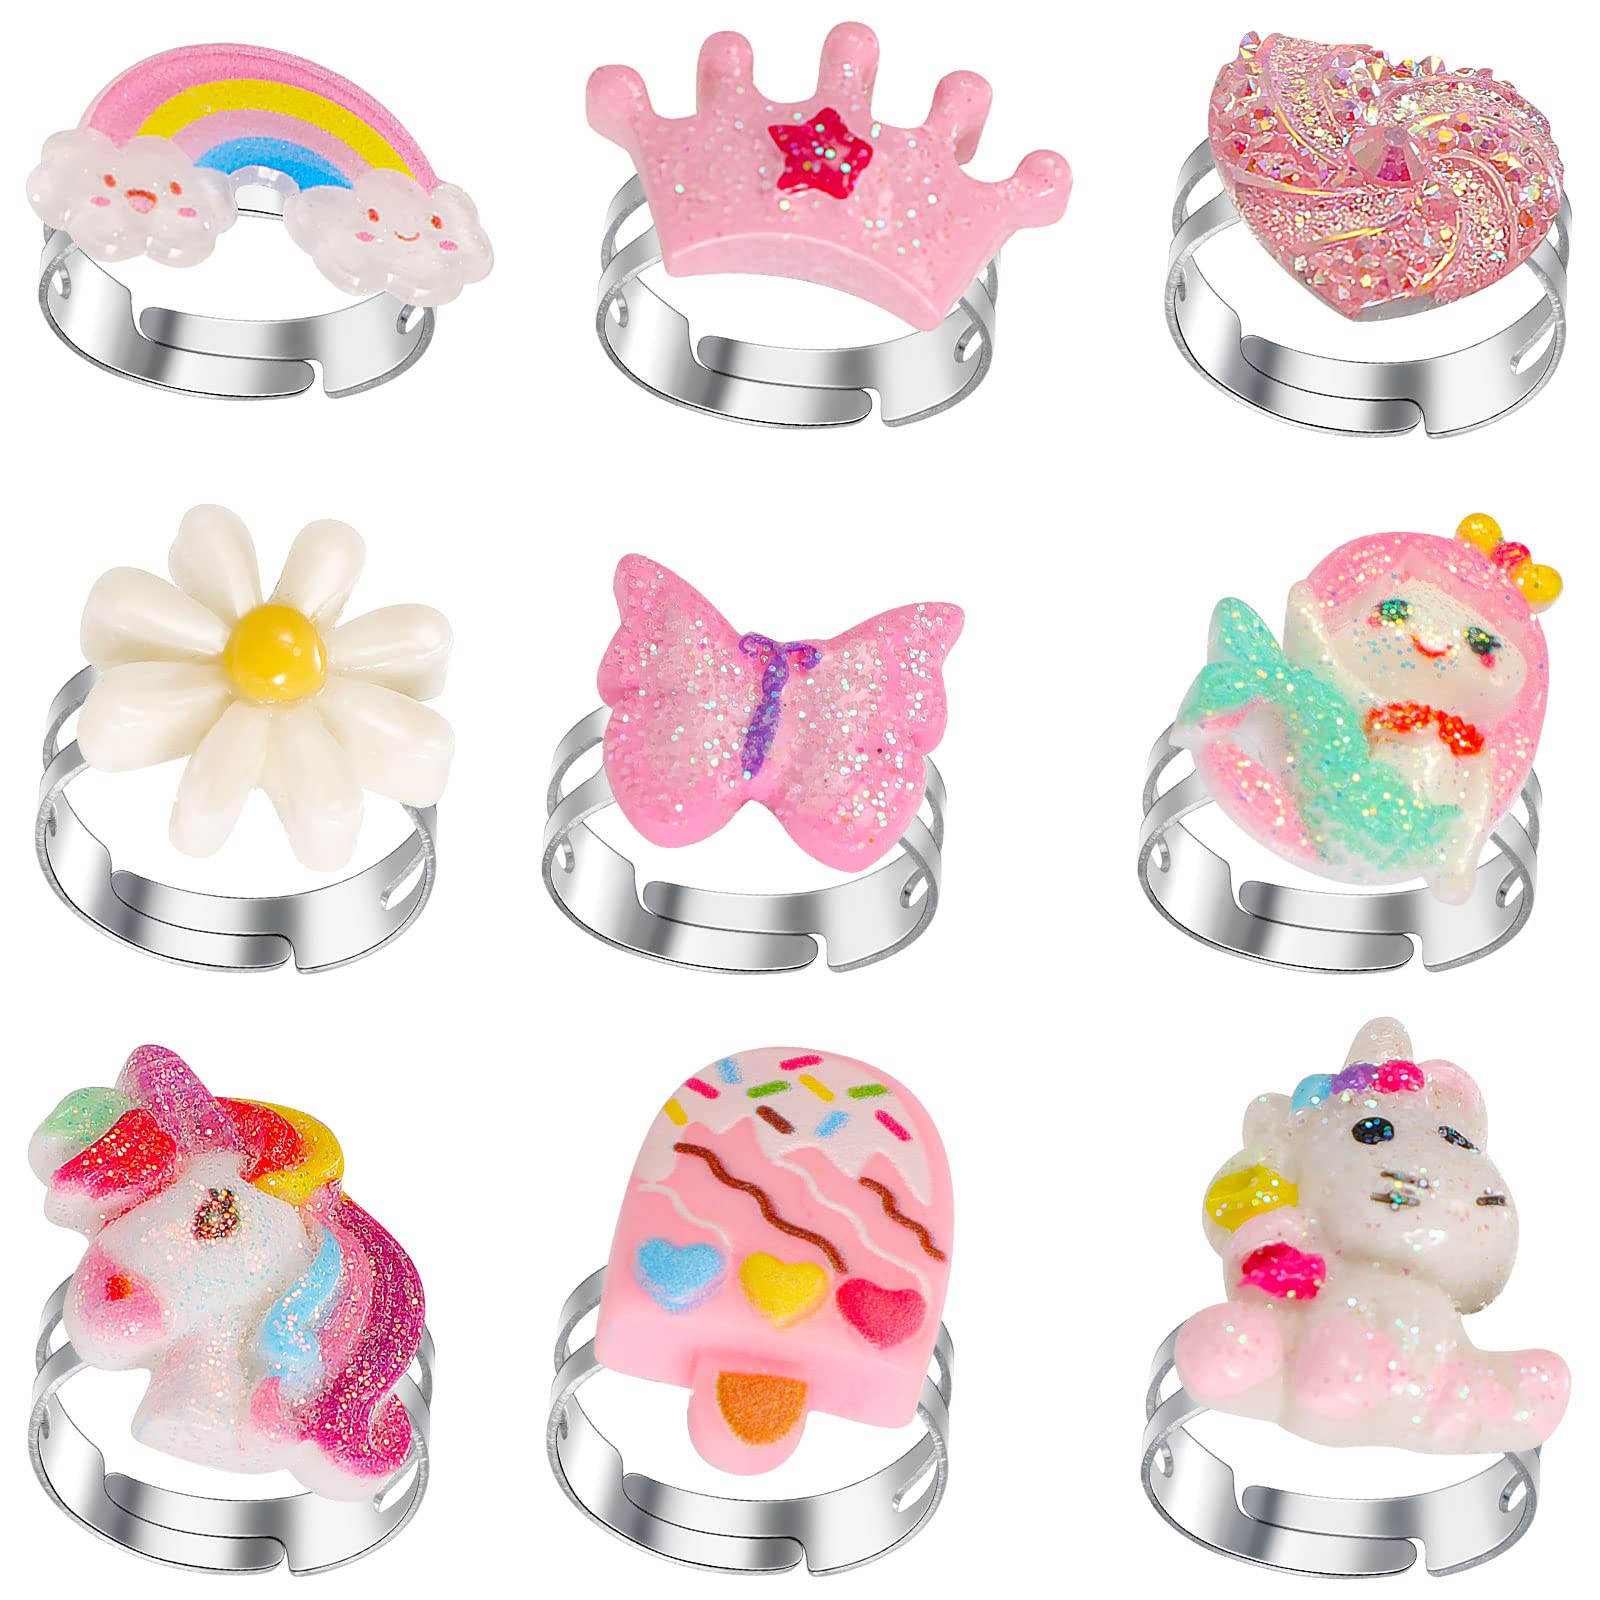 9 Pcs Adjustable Rings Set for Girls Cute Unicorn Rings Colorful Butterfly Mermaid Jewelry Rings Crown Daisy Heart Rings Girls Play Party Favor Rings Dress up Rings for Kids